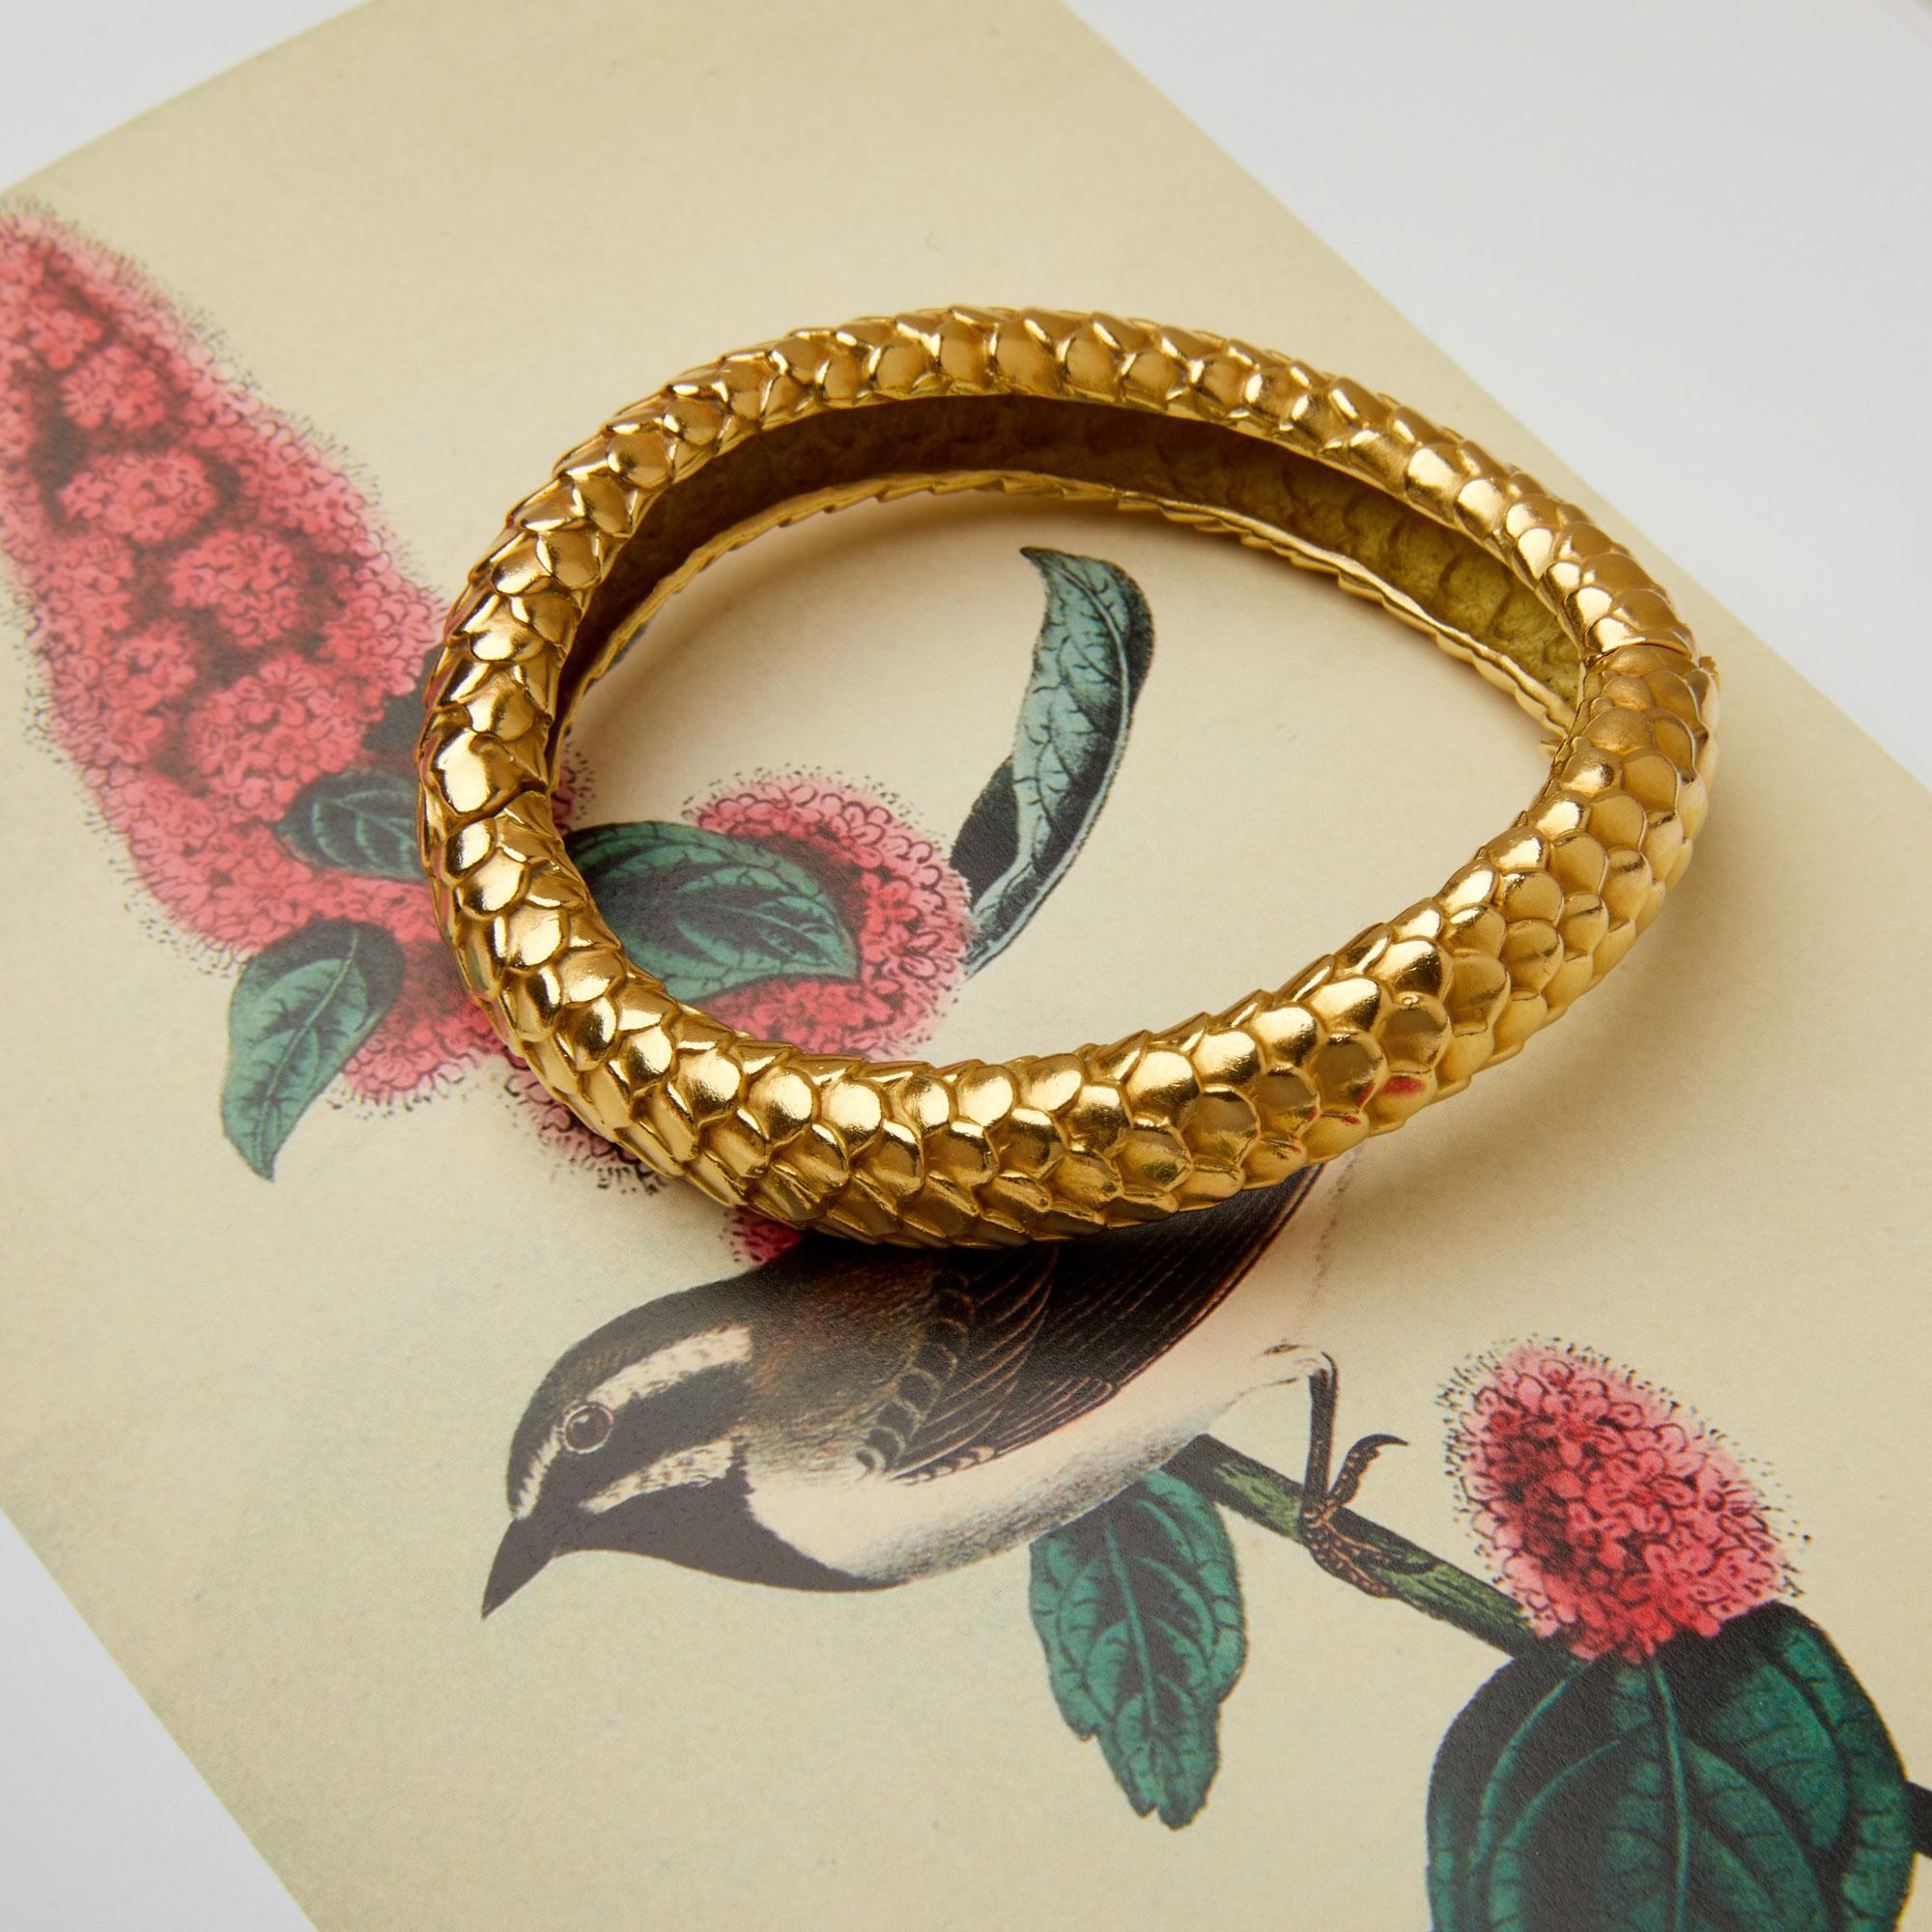 Angela Cummings 18K Yellow Gold Fish Skin Bracelet In Excellent Condition For Sale In Weston, MA